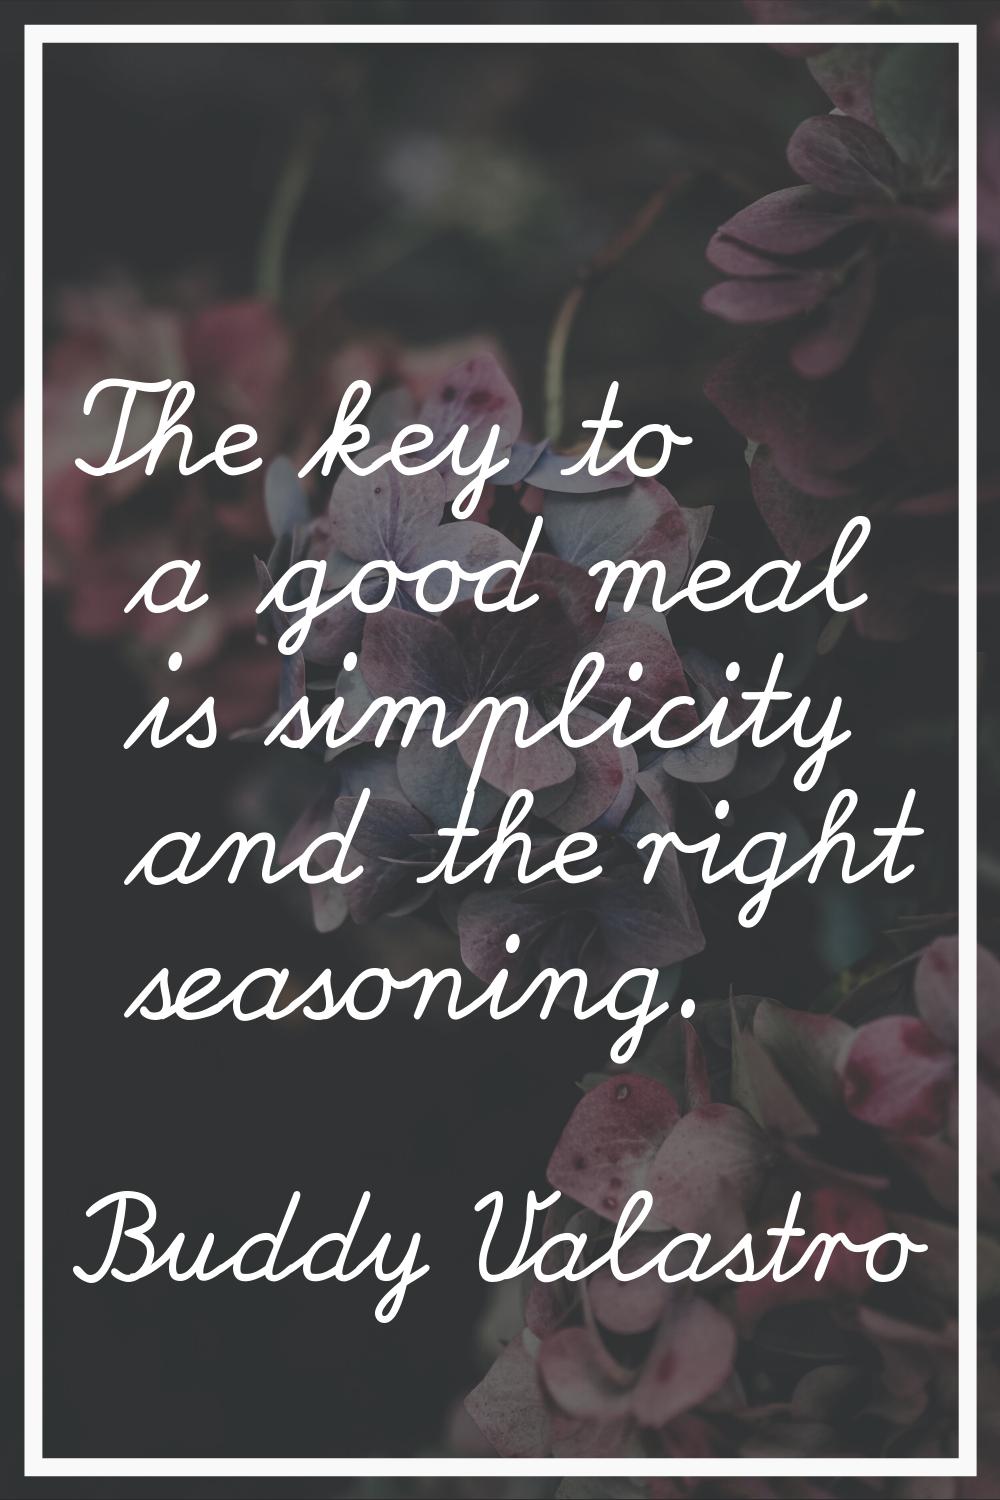 The key to a good meal is simplicity and the right seasoning.